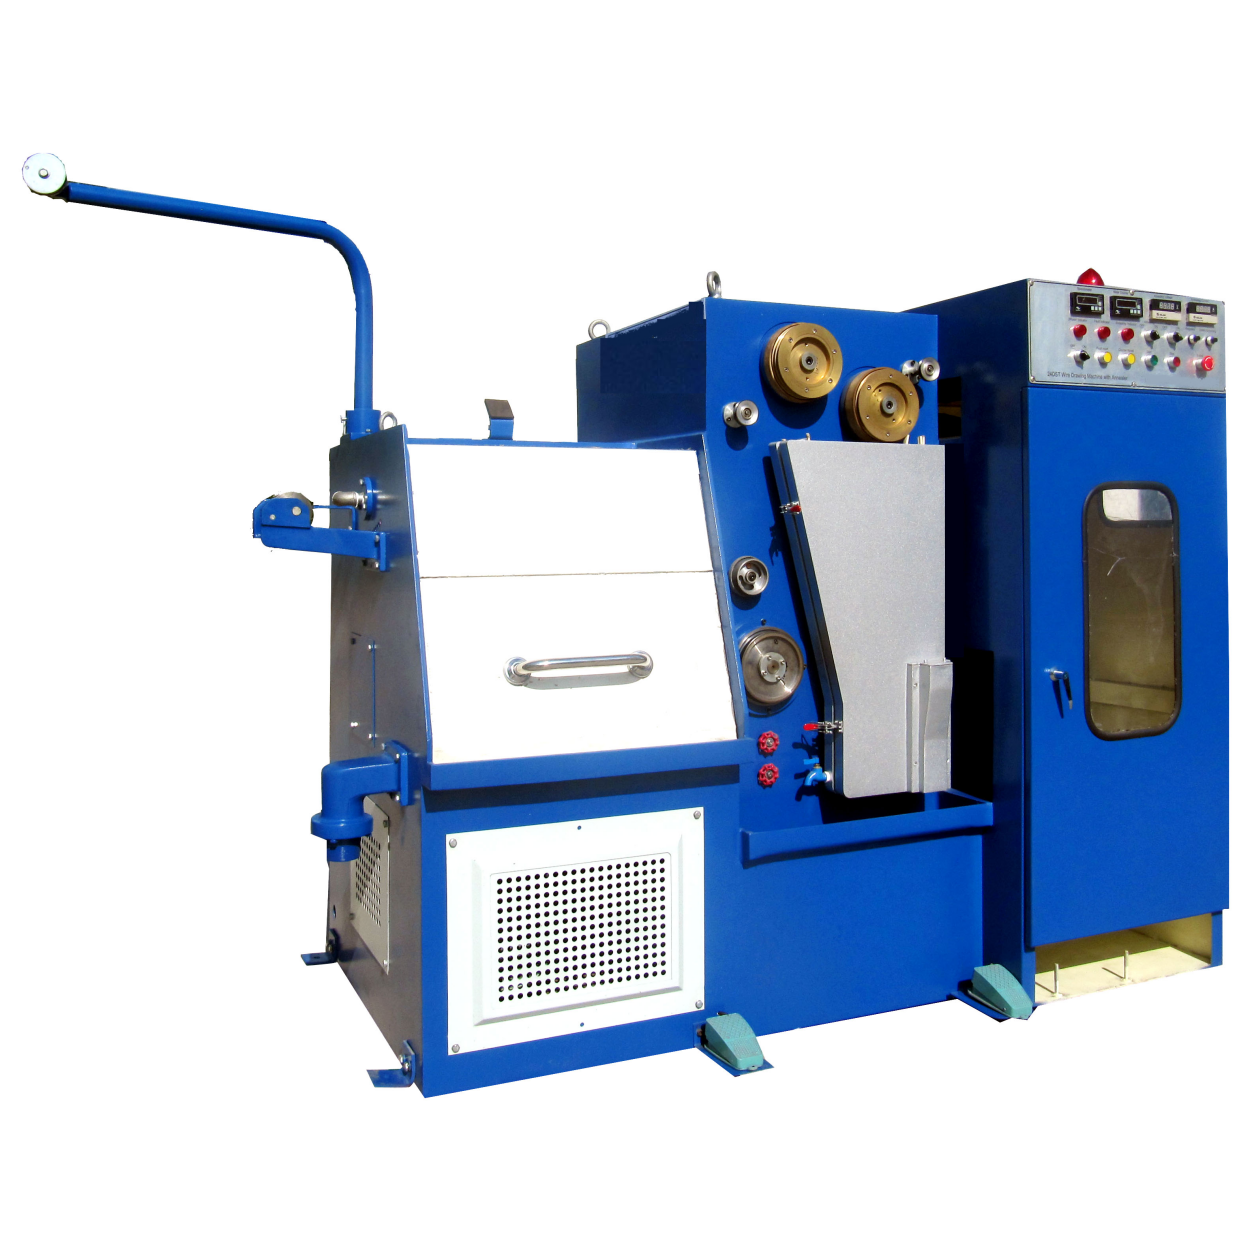 22DT Fine Copper wire drawing machine with annealing